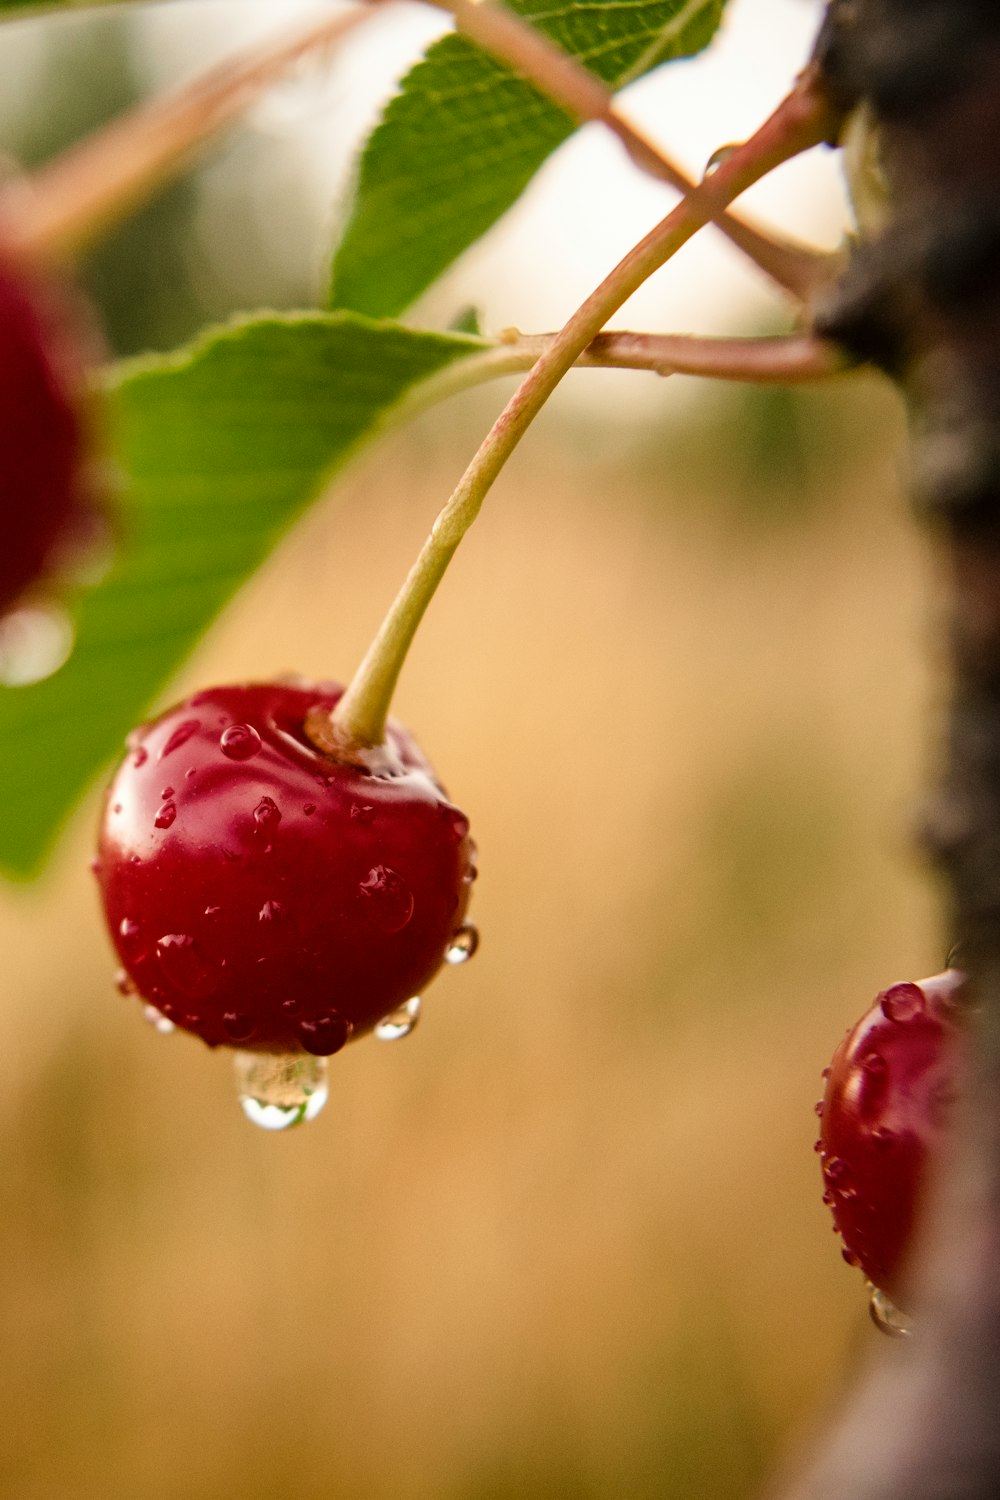 red cherry fruit in close up photography